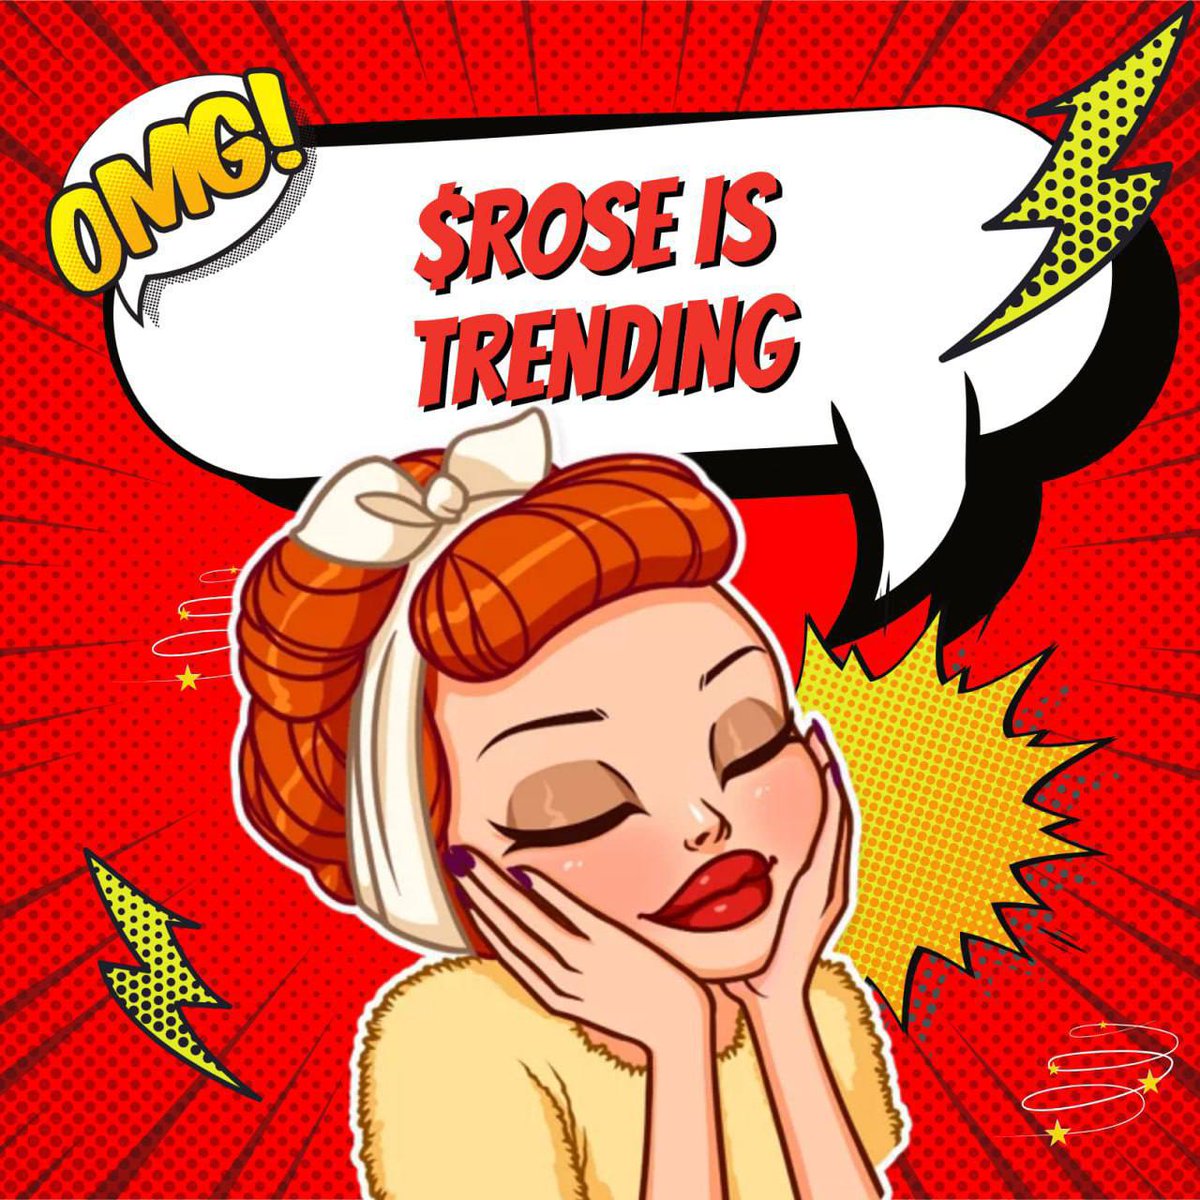 Saw a couple memetokens run hard on TON and $ROSE | Rosecoin on DeDust is one of them👀. Its a fan token of one of the most used telegram bots by the crypto community. Chart looking great🔥! @RosecoinTon 〽️CMC: coinmarketcap.com/currencies/ros… 💬TG: t.me/Rosecointon #DYOR #TON🟧